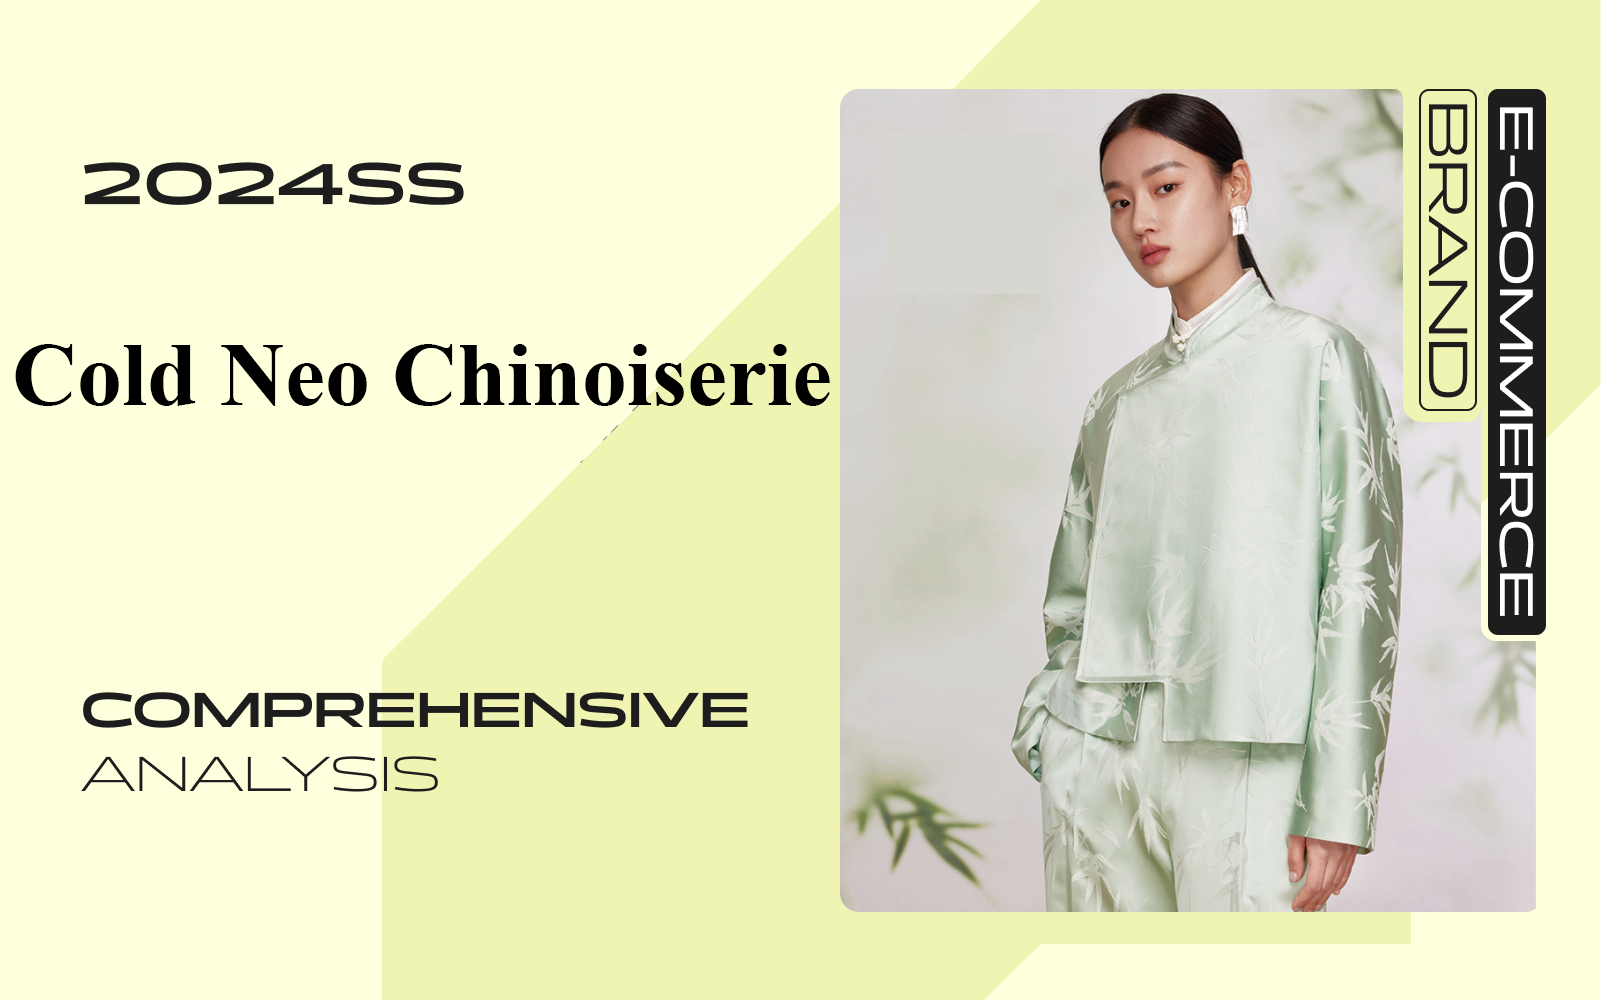 Cold Neo Chinoiserie -- The Popular Style of E-Commerce Womenswear Brand